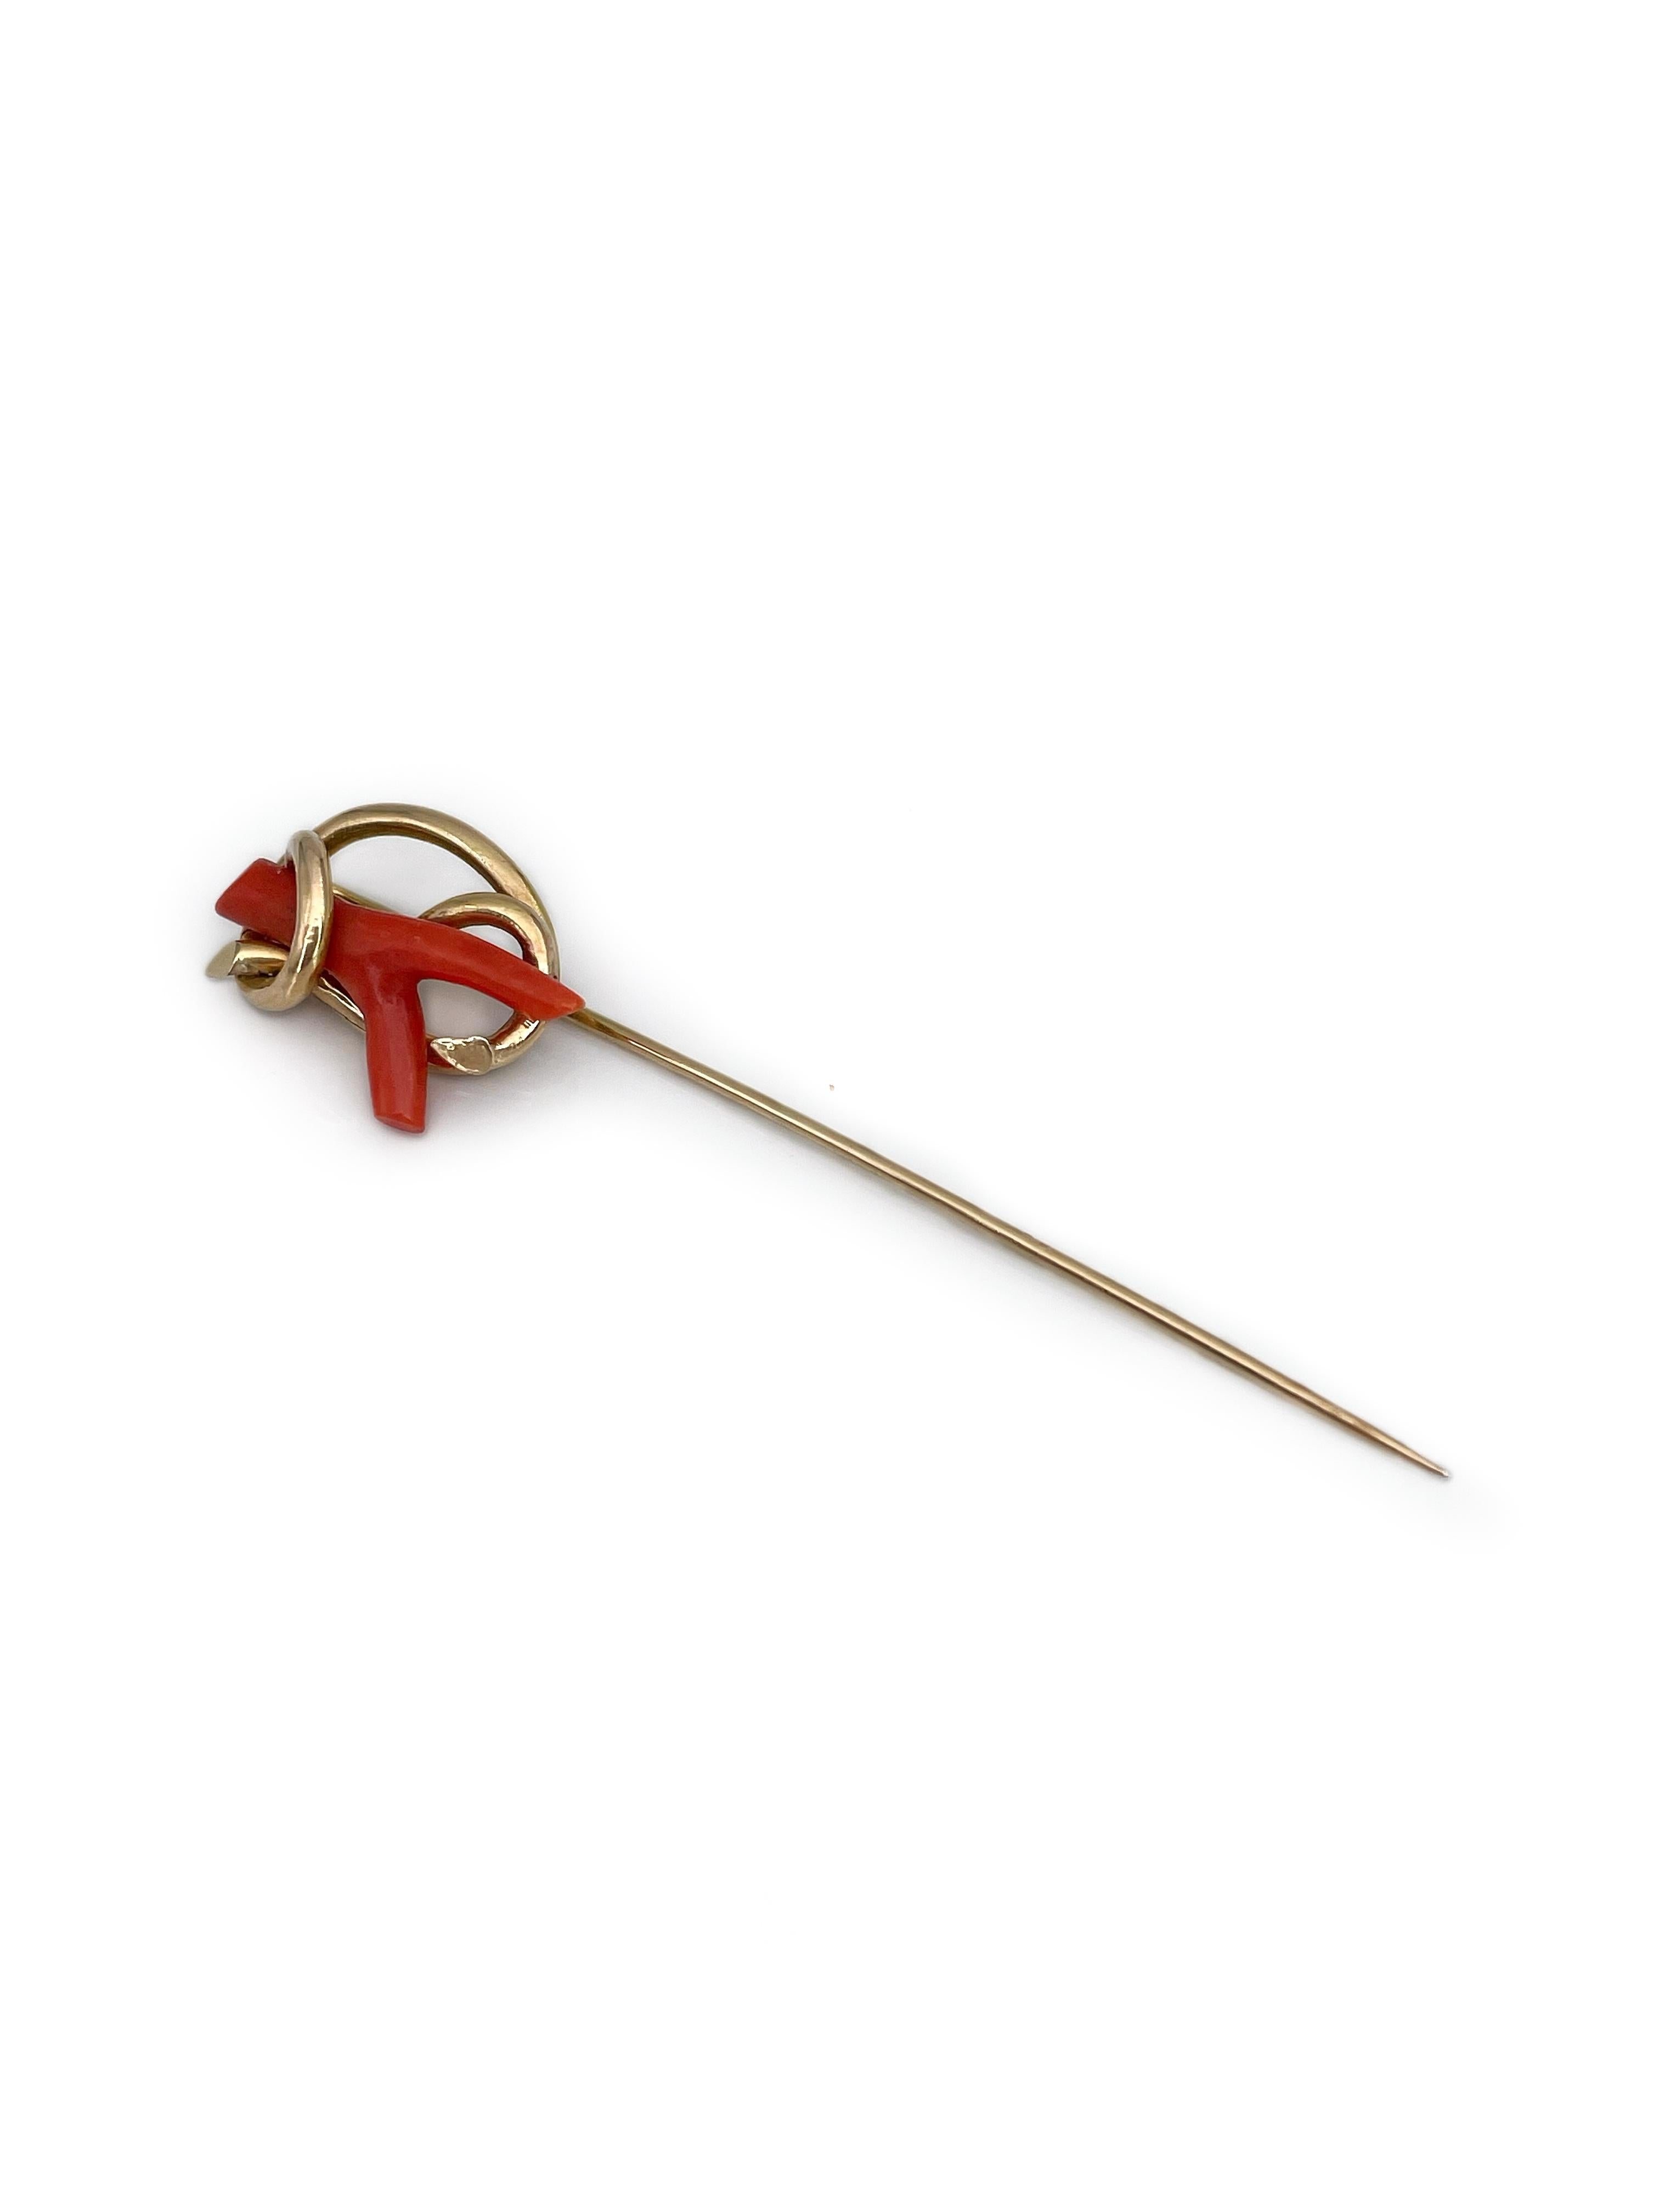 This is a Victorian stick pin brooch crafted in 14K yellow gold. The piece features wrapped natural red coral branch. It was worn as an amulet. 

Rare find and highly collectable.

Weight: 3.11g
Length: 7.5cm

———

If you have any questions, please